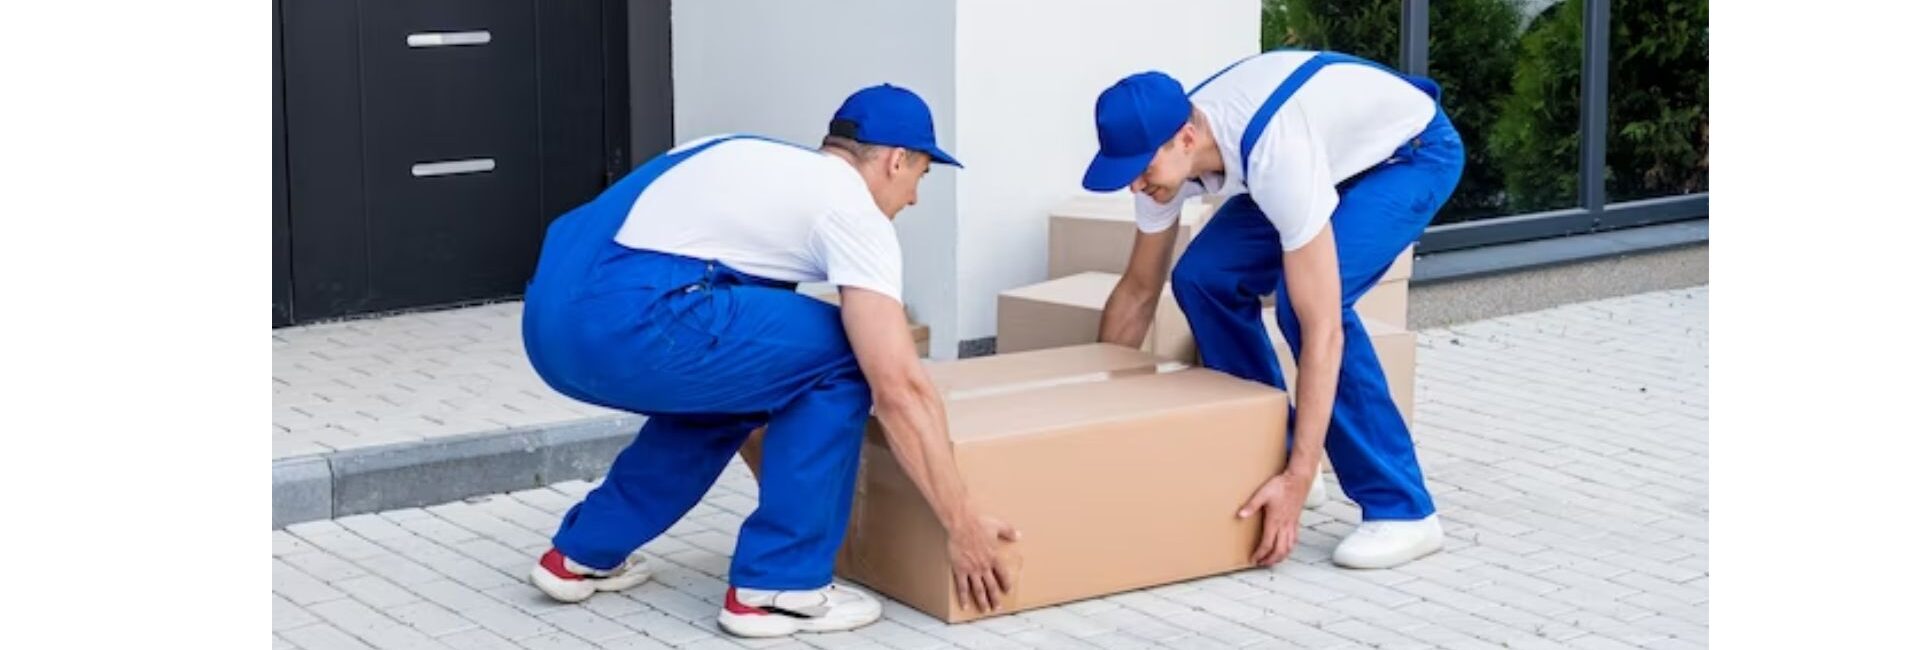 Relocation Express Packers and Movers - Expert Packers and Movers in Noida